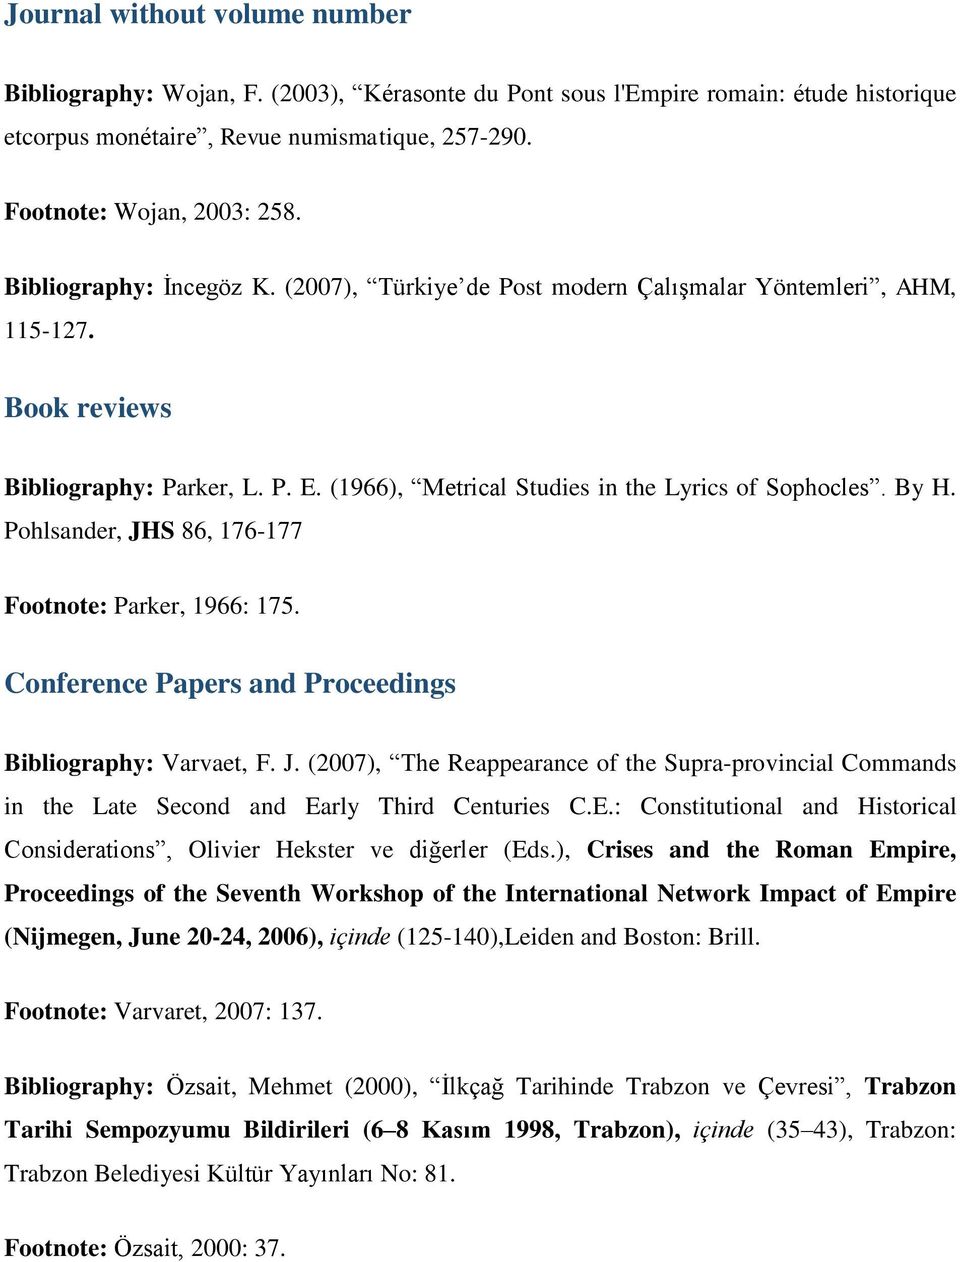 Pohlsander, JHS 86, 176-177 Footnote: Parker, 1966: 175. Conference Papers and Proceedings Bibliography: Varvaet, F. J. (2007), The Reappearance of the Supra-provincial Commands in the Late Second and Early Third Centuries C.